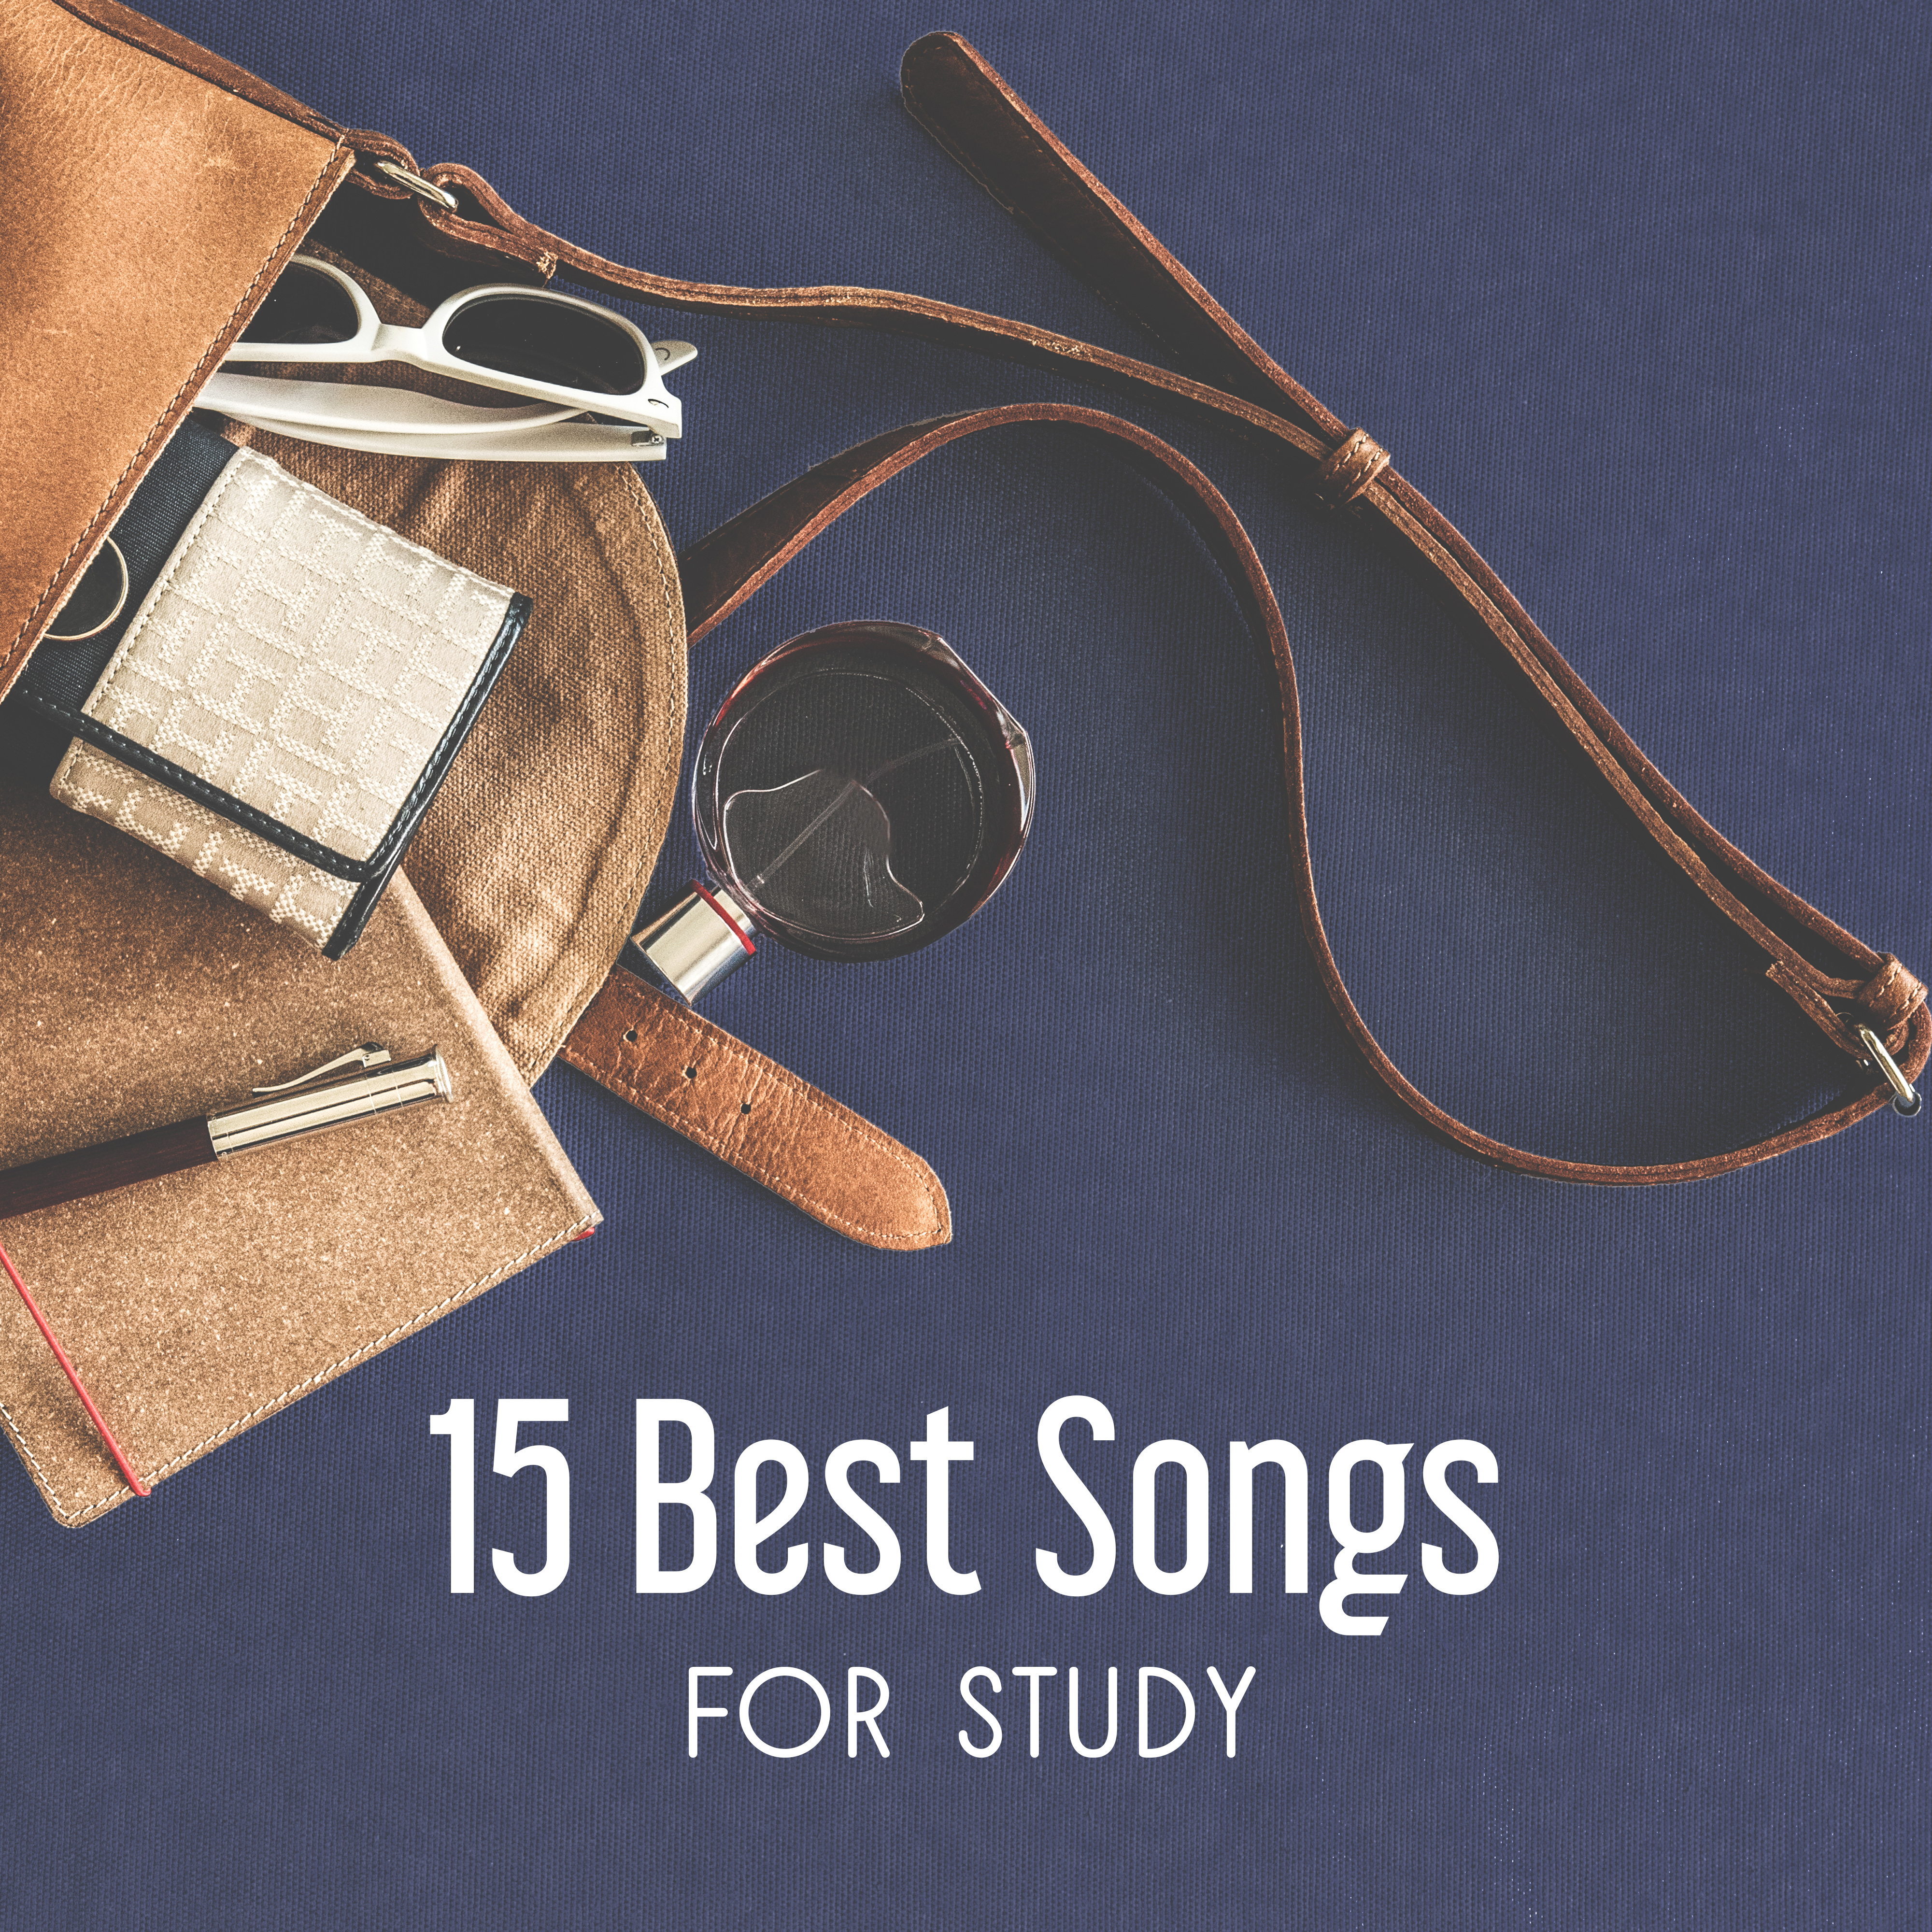 15 Best Songs for Study  Easy Learning, Focus, Better Concentration, Einstein Effect, Mozart, Beethoven